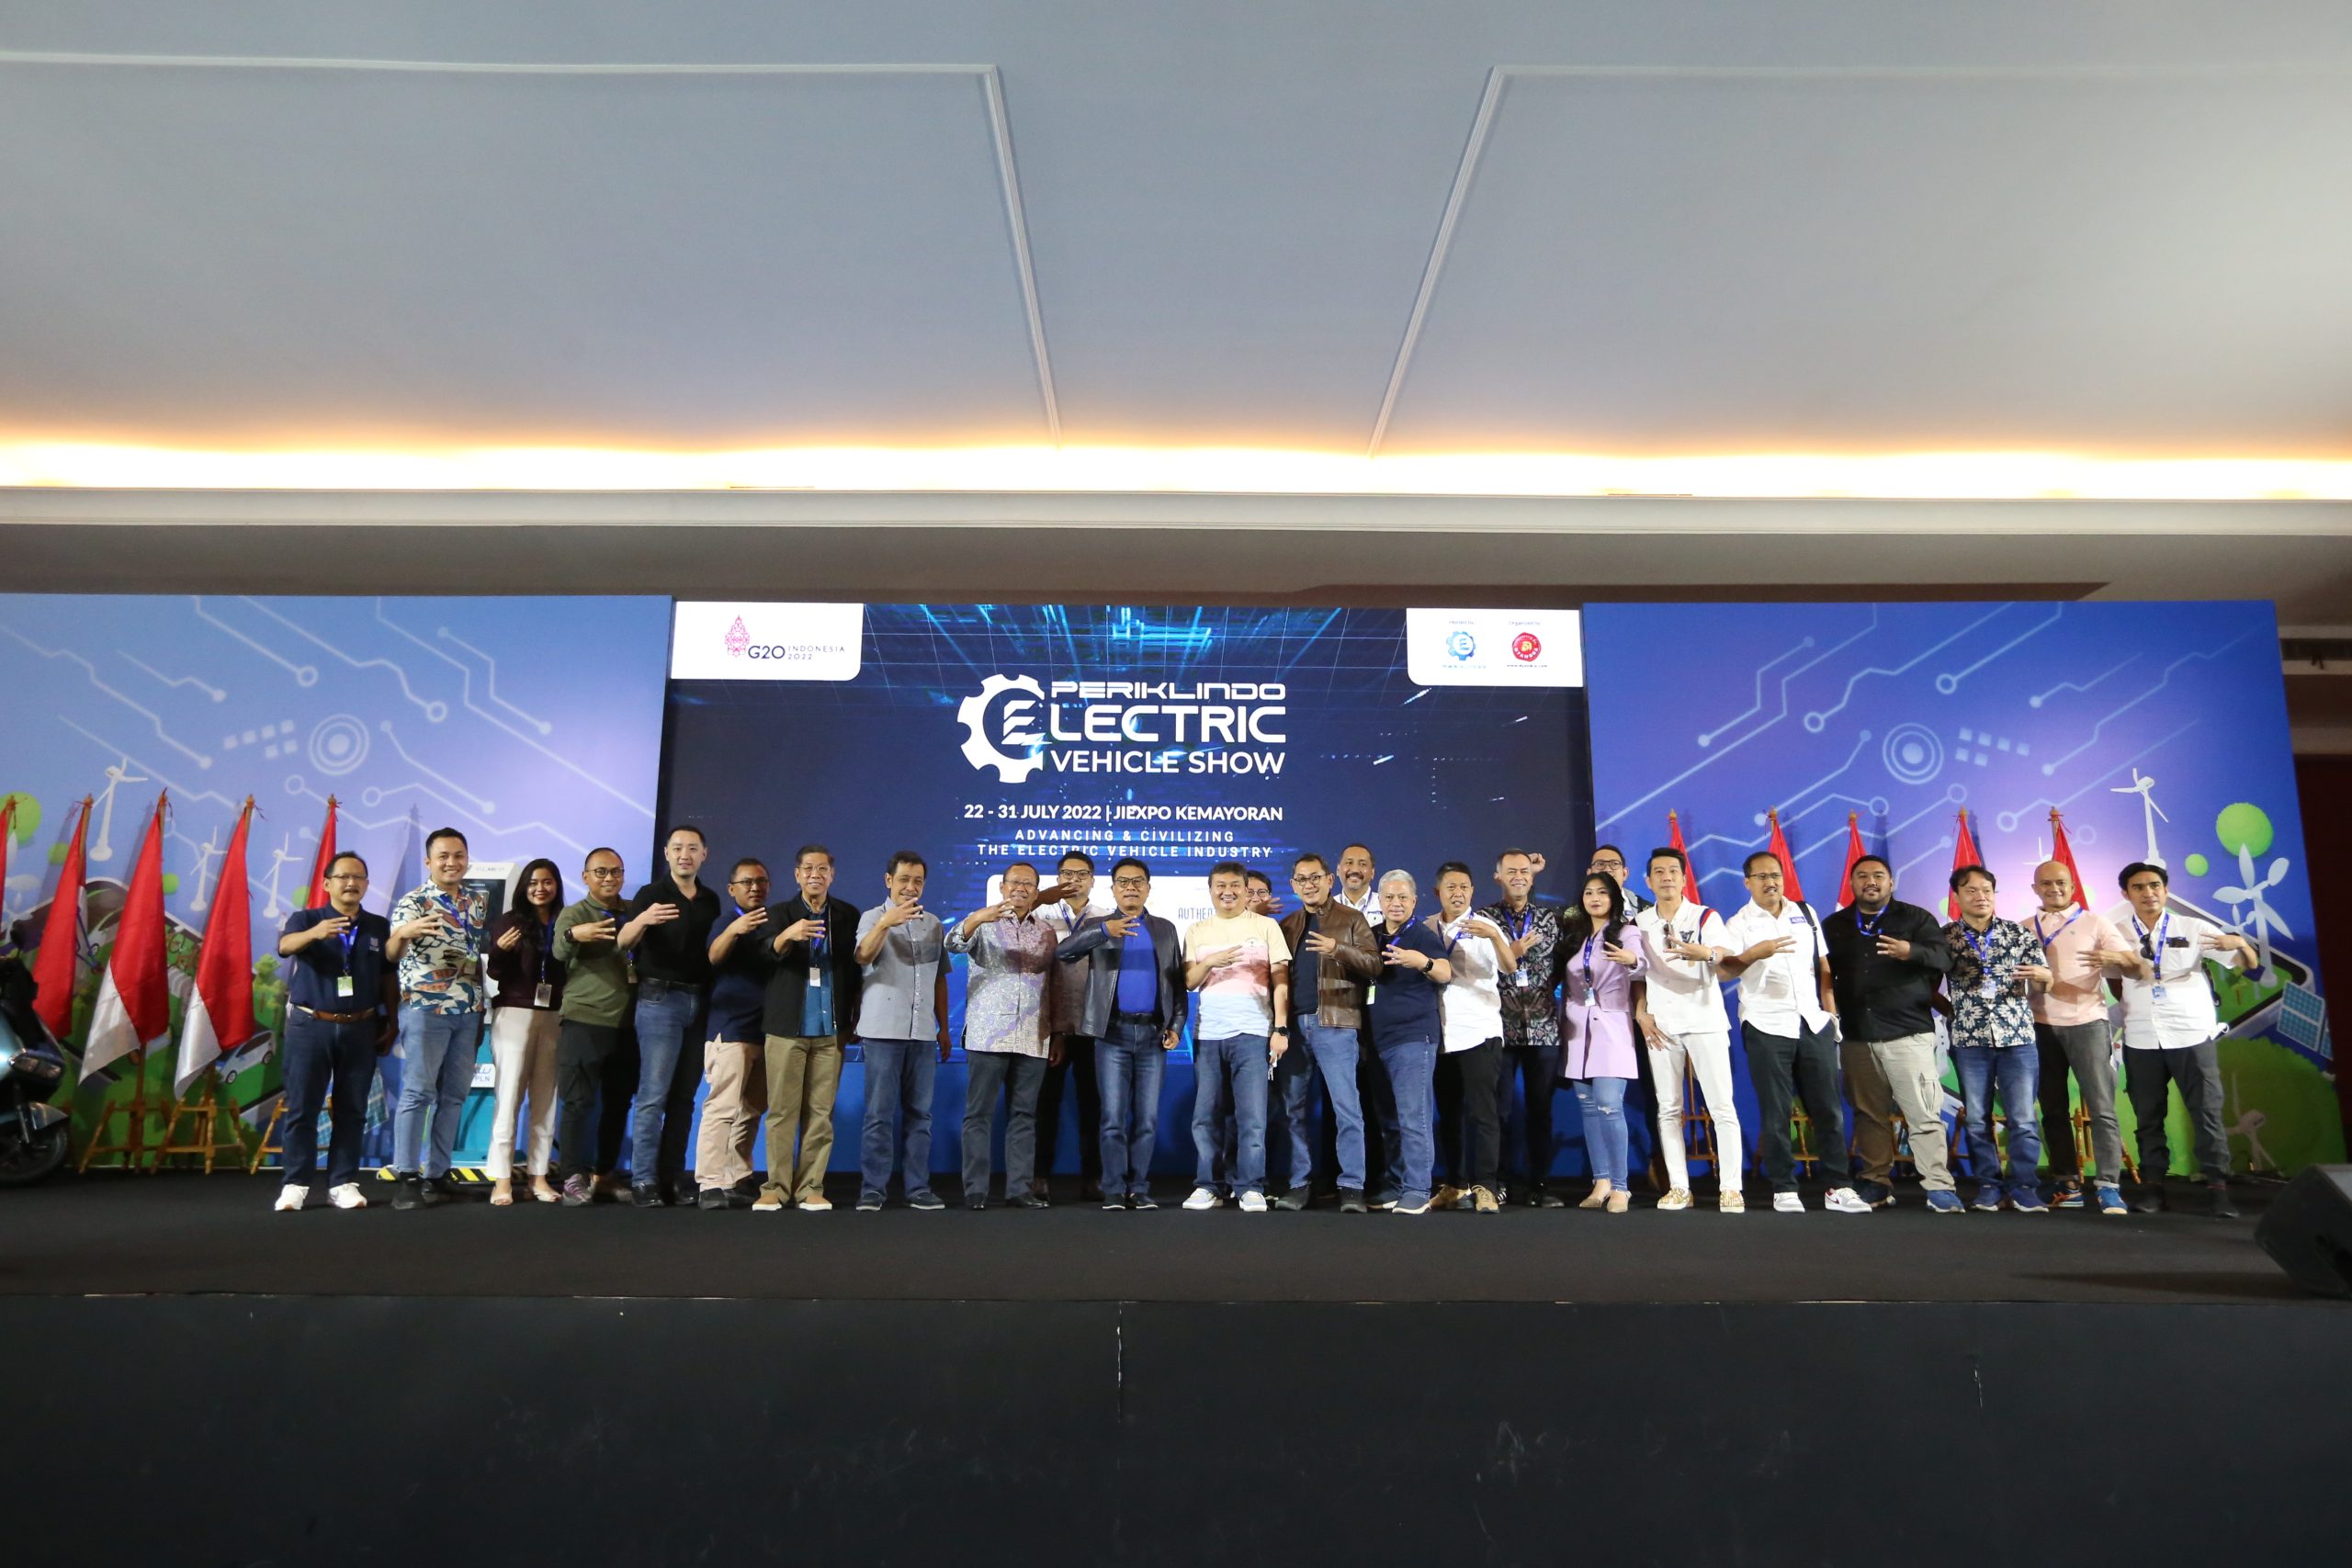 DAY 9 (PERIKLINDO ELECTRIC VEHICLE SHOW 2022)